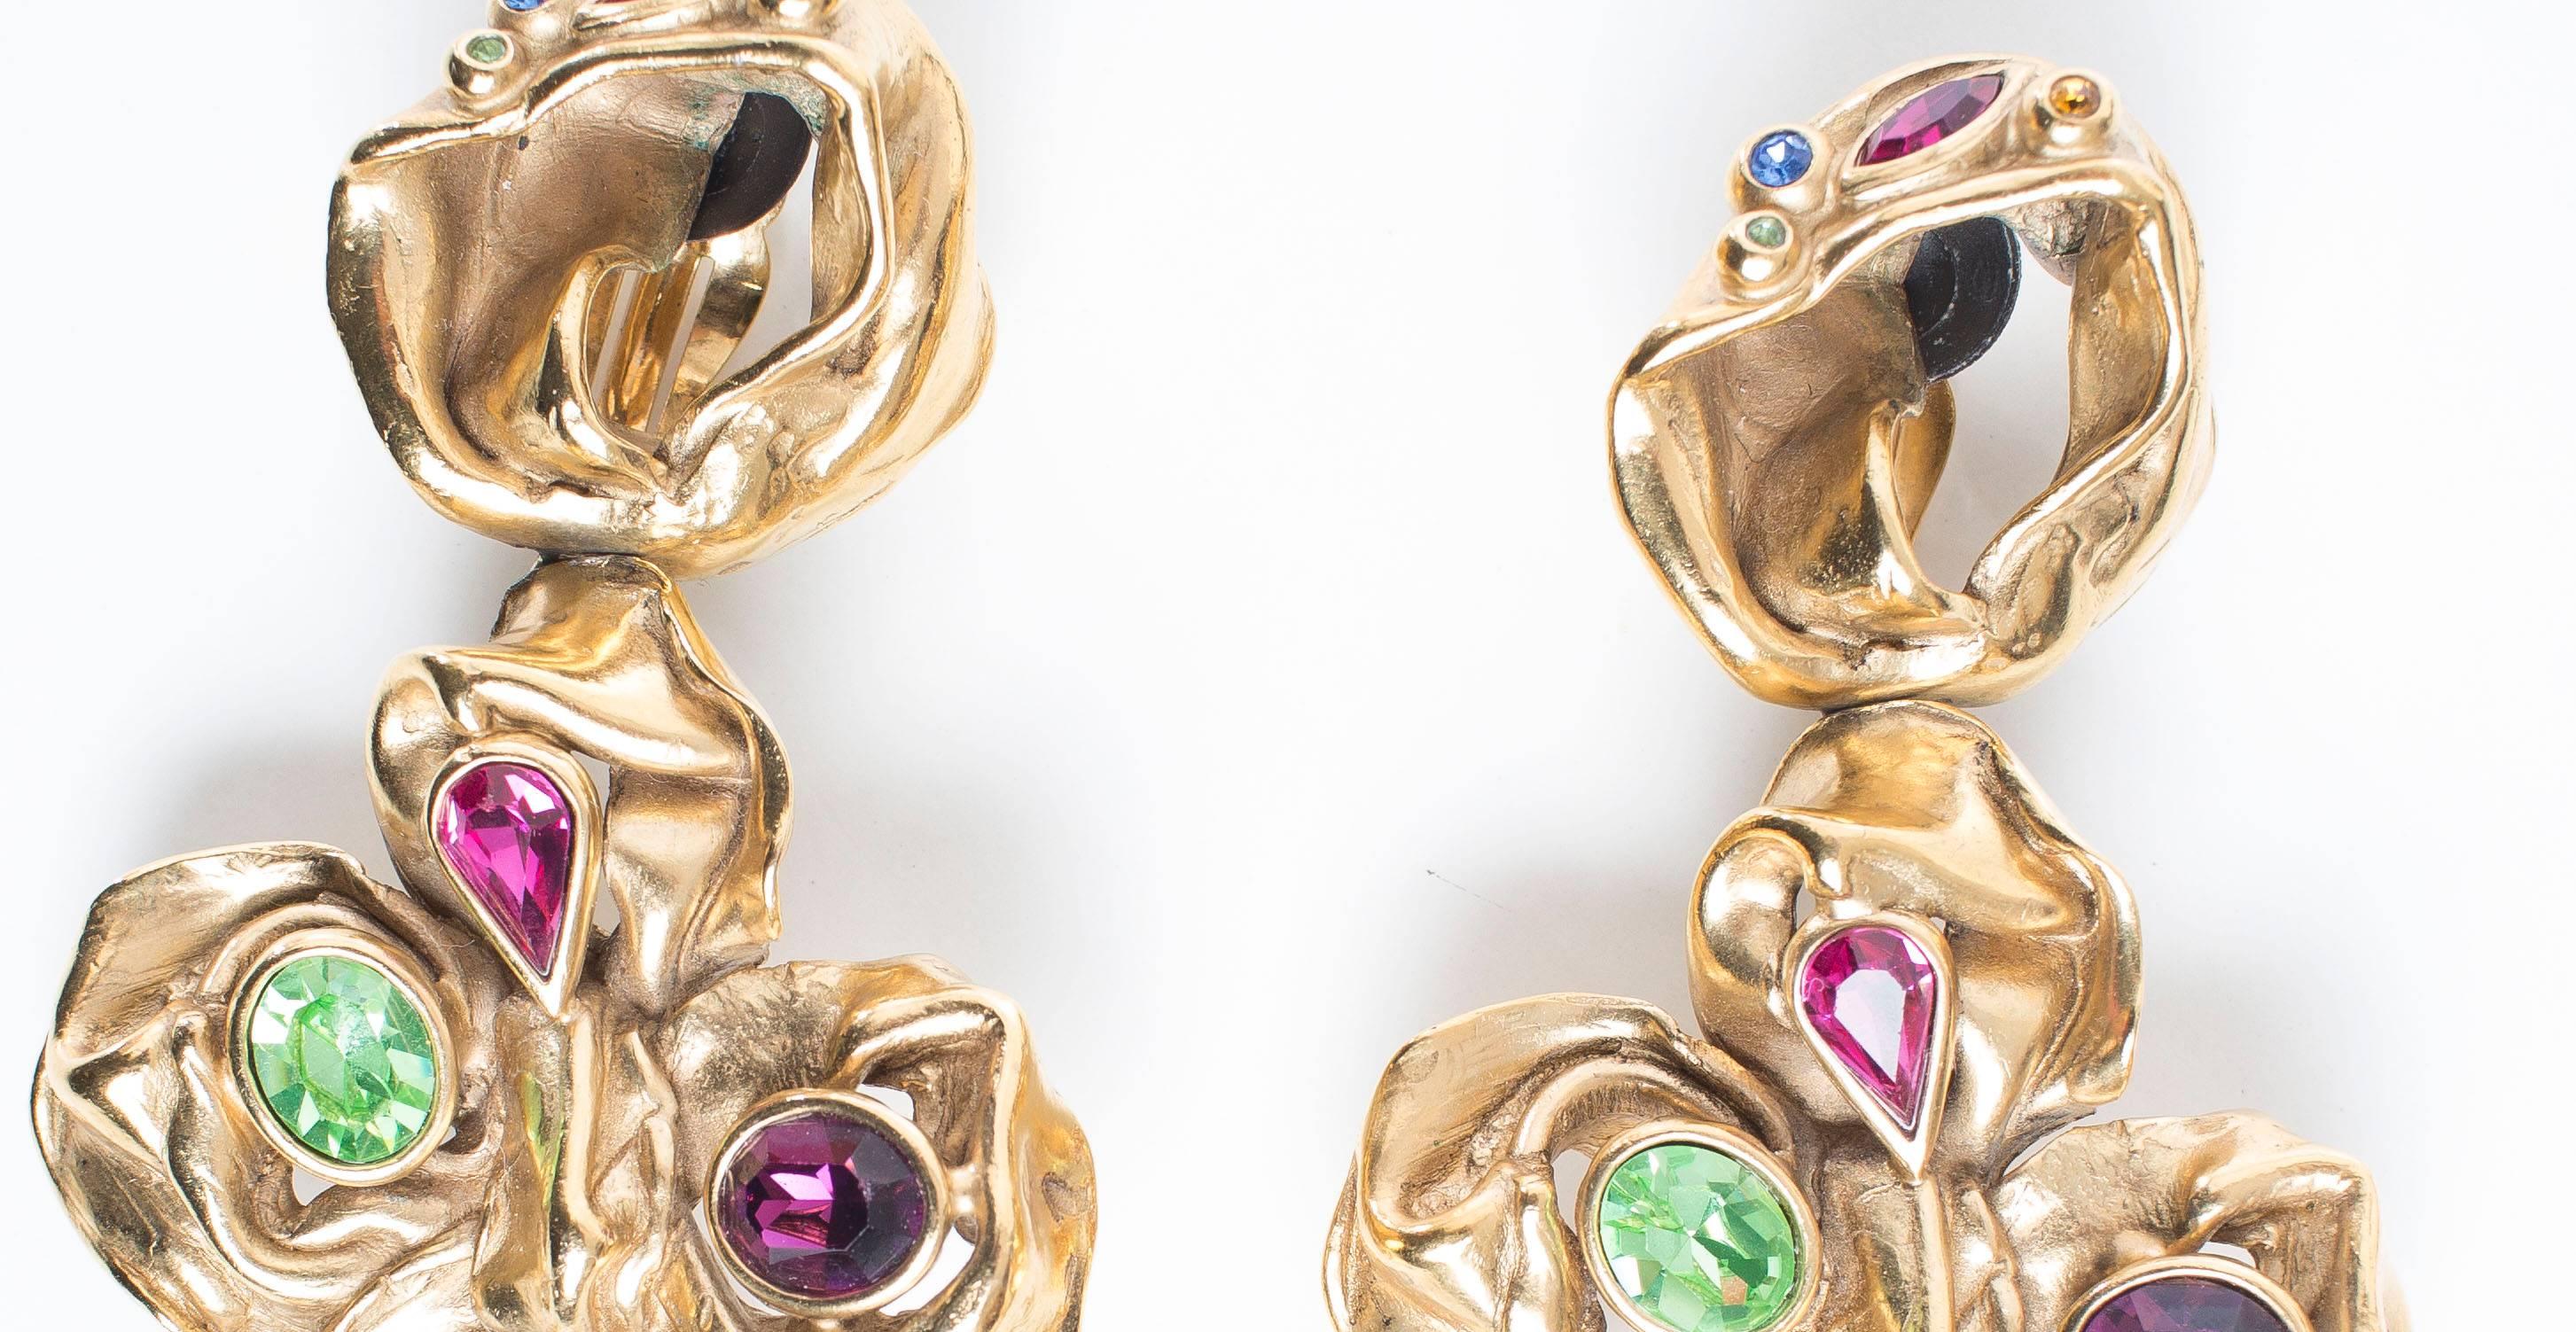 Yves Saint Laurent, circa 1980's, massive gilt leaf, clip-on earring with multi-colored faceted stones and created in the ateliers of French parurier Robert Goossens.